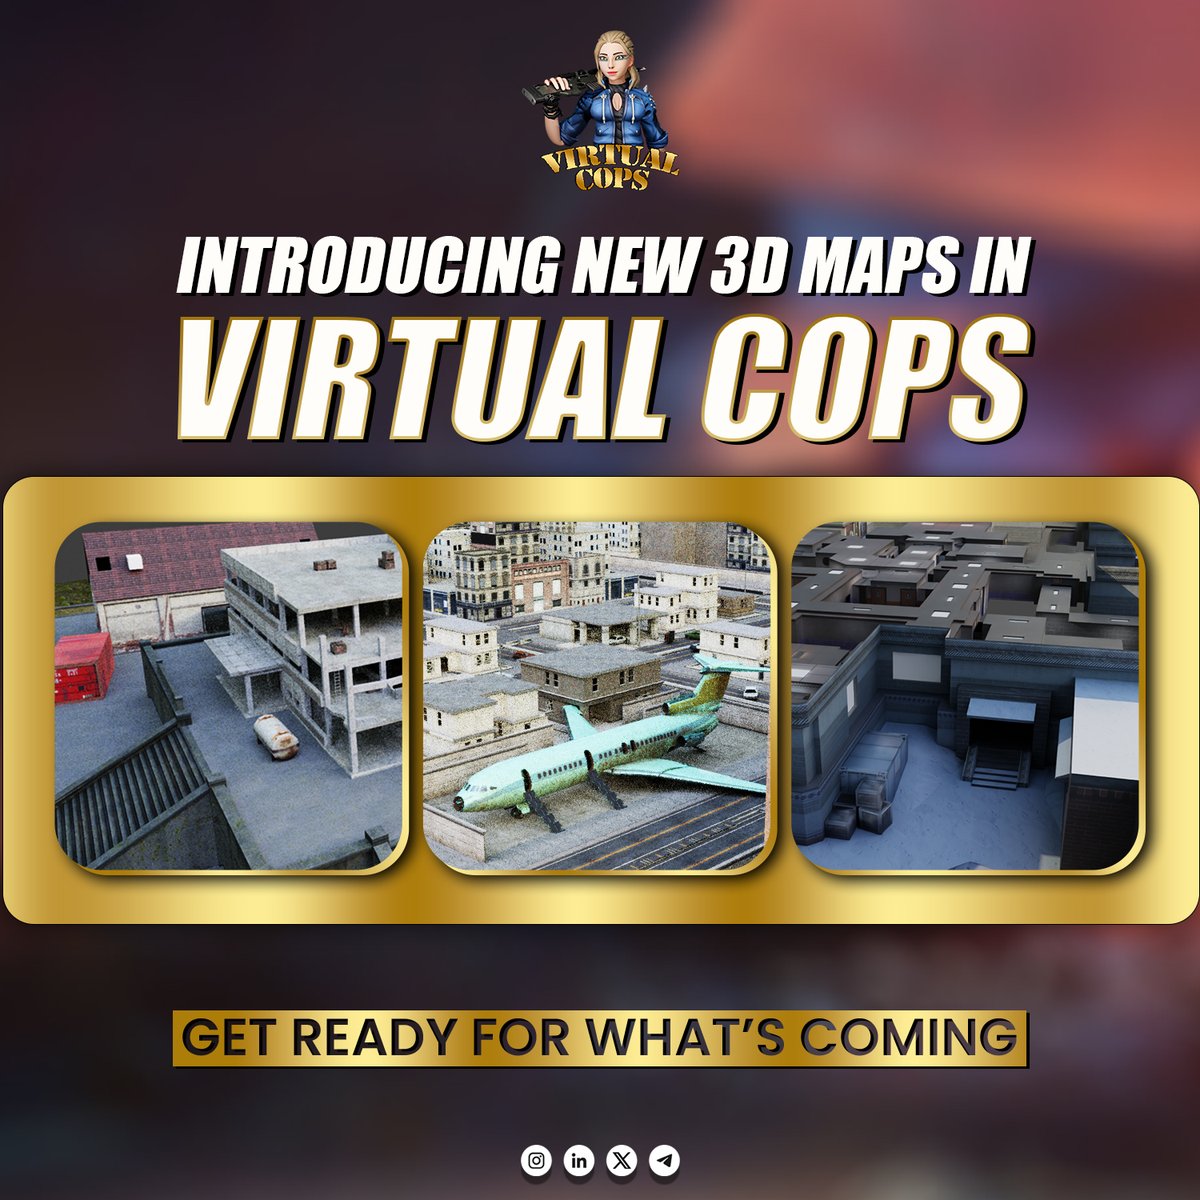 Prepare to immerse yourself in the next level of virtual Cops with our groundbreaking 3D map. Get ready for action!

#virtualcops #virtualcops2 #PlayToWin #PlayToEarn  #P2E  #P2EGame #vzone #vzonesolutions #ComingSoon  #comingout  #newgame